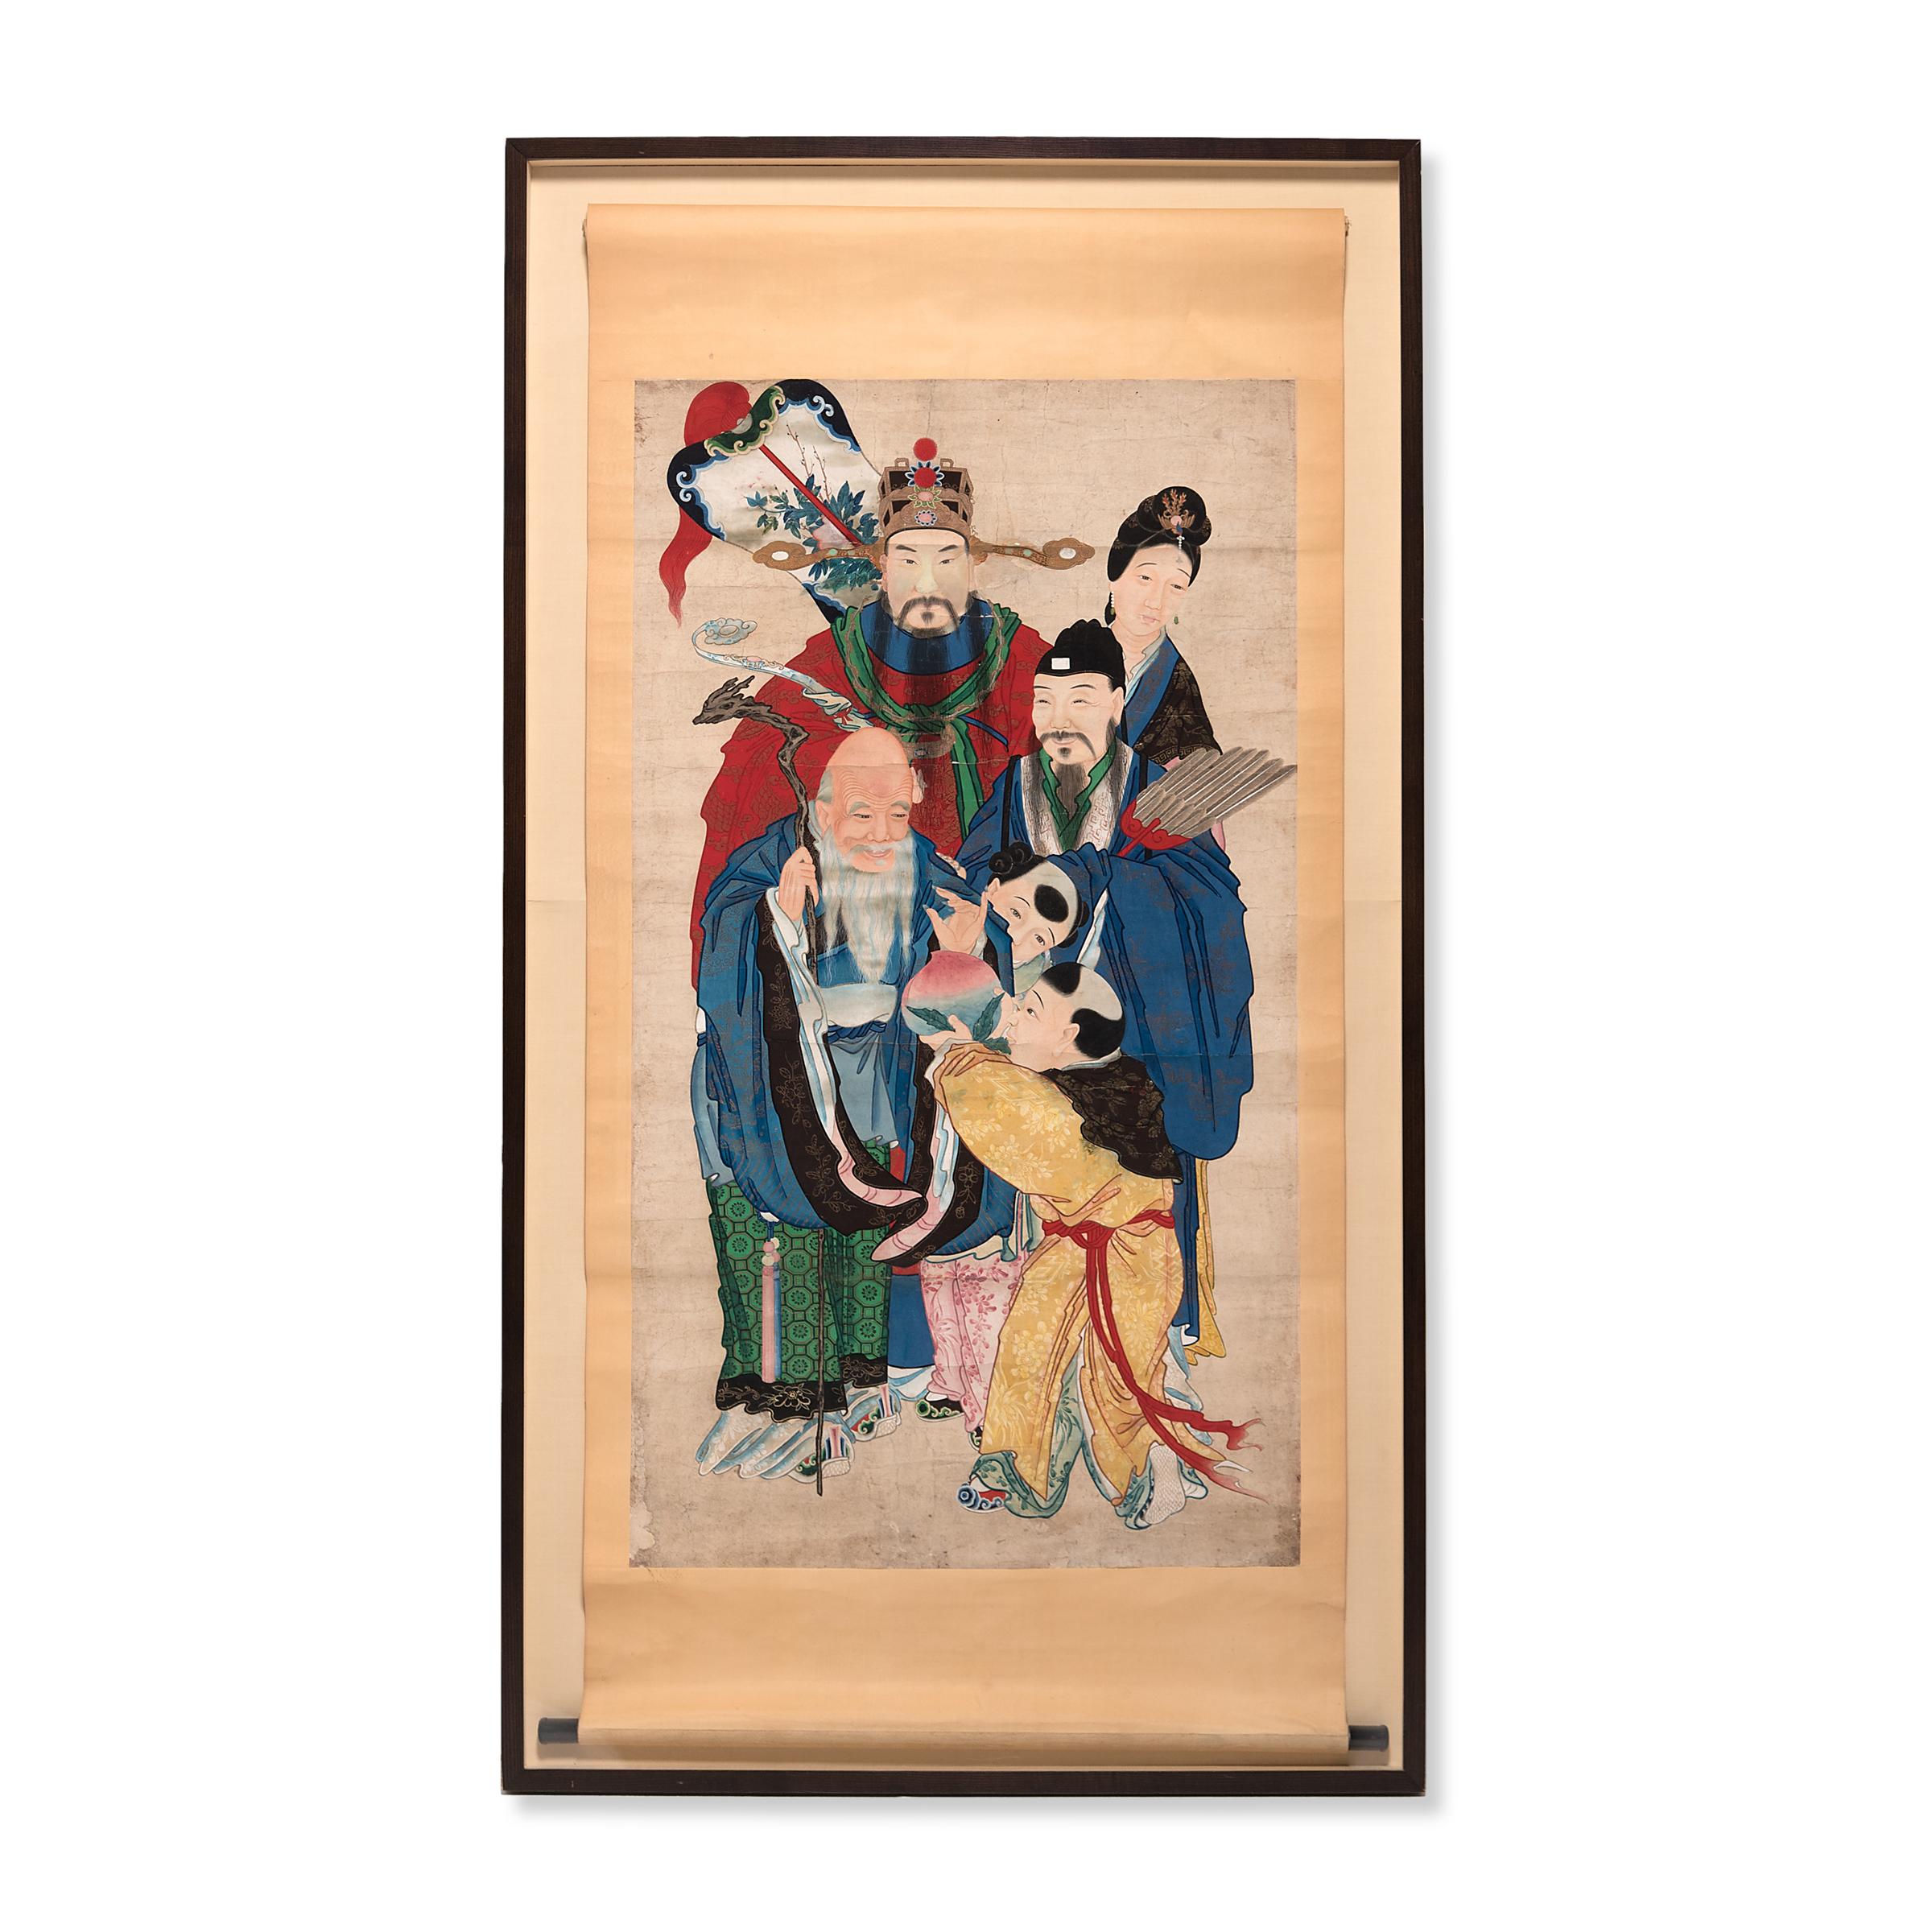 Chinese Lunar New Year Painted Scroll, c. 1850 - Art by Unknown